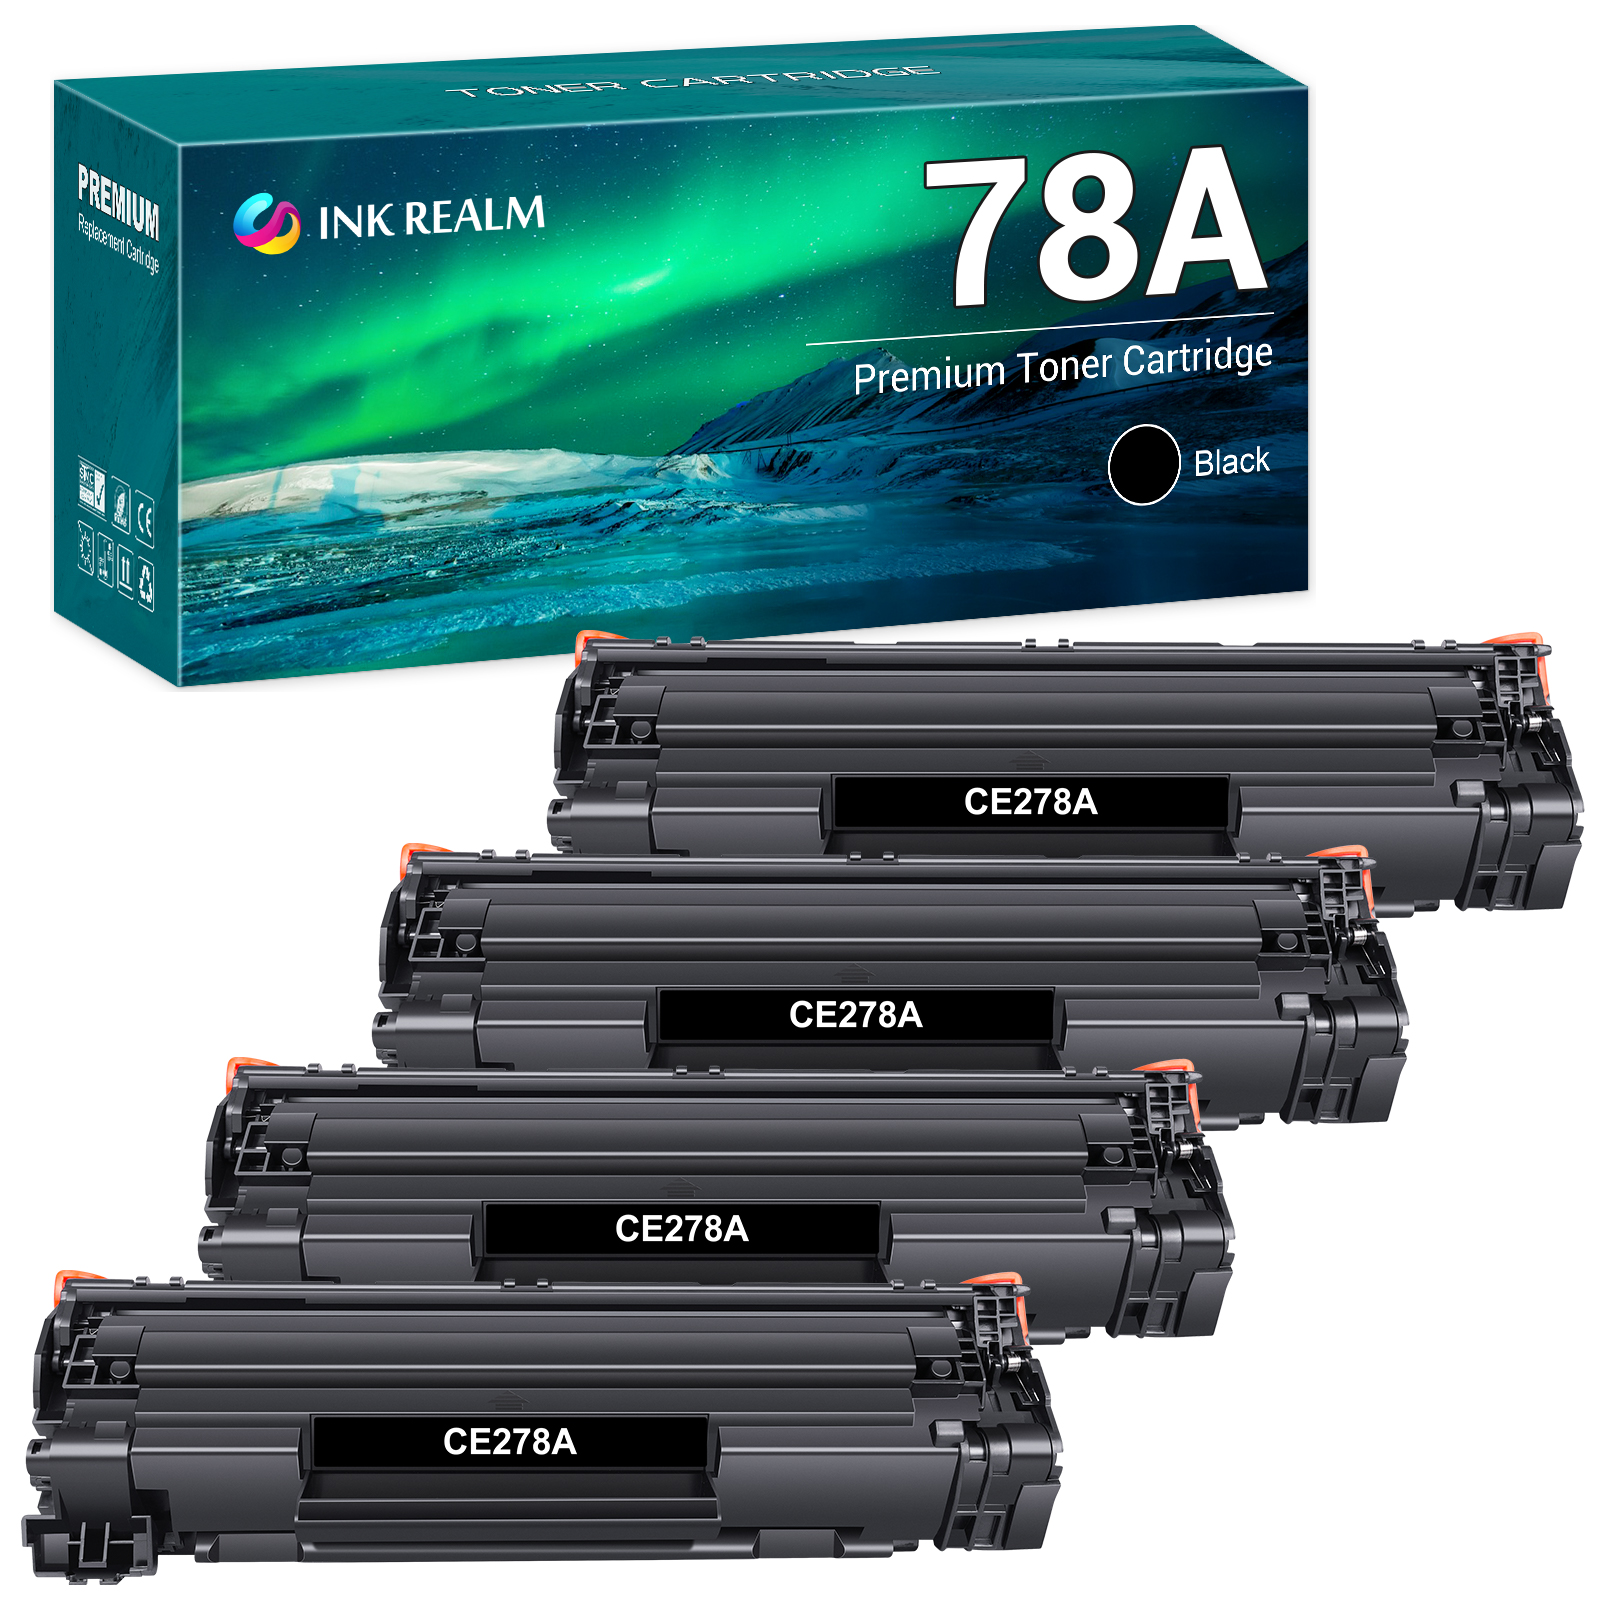 78A CE278AD | 4-Pack Compatible Toner Cartridge for HP CE278A 78A P1606dn 1536dnf MFP M1536dnf 1606dn P1606 P1566 P1560 HP LaserJet Printer Ink Replacement Part Black - image 1 of 11